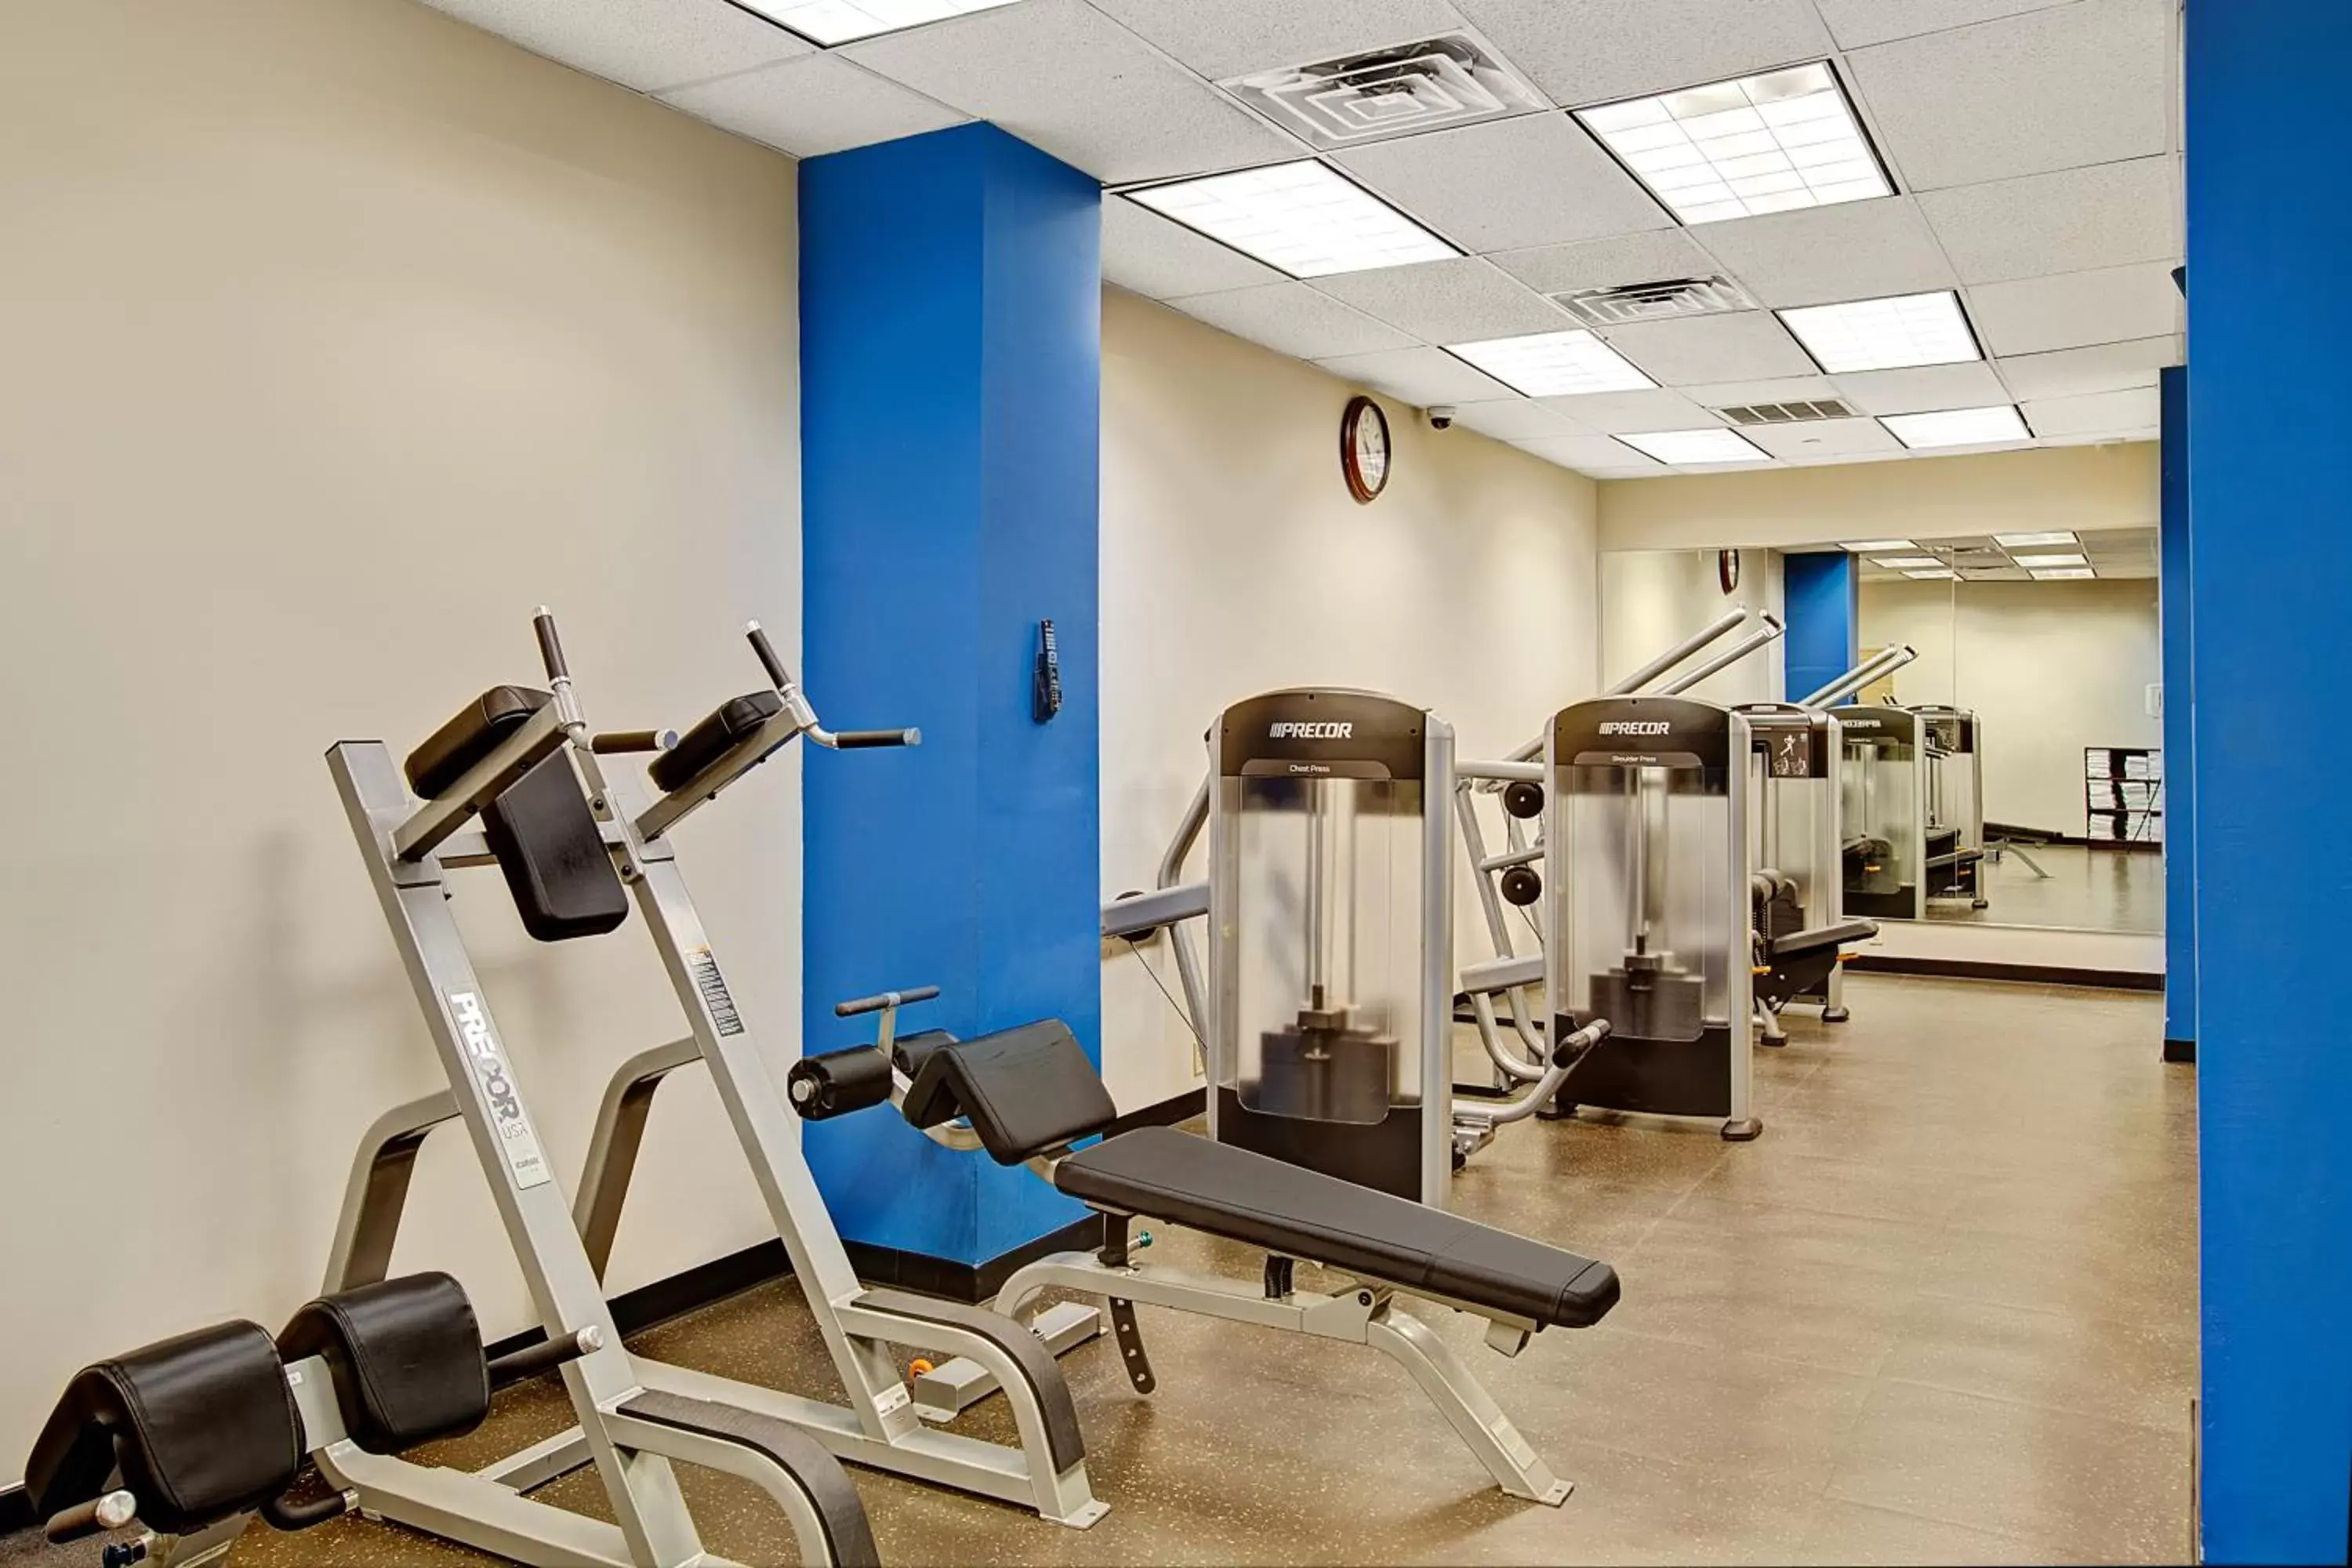 Fitness centre/facilities, Fitness Center/Facilities in The New Yorker, A Wyndham Hotel